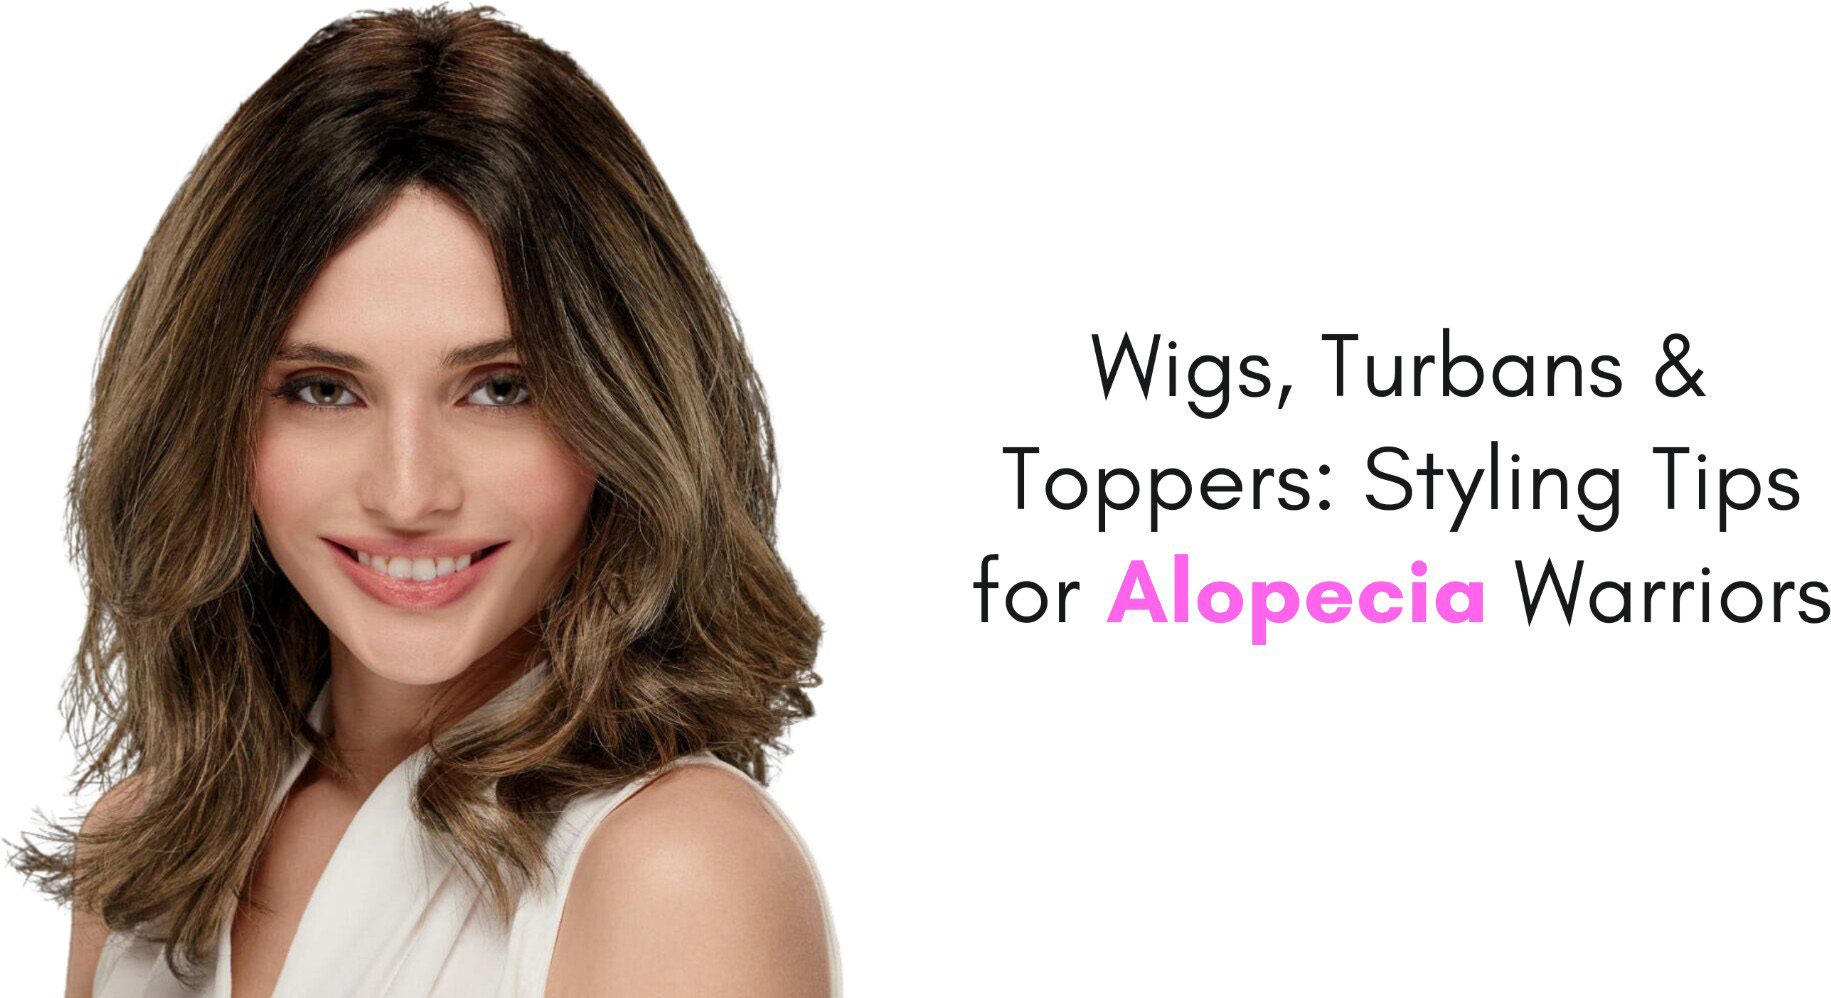 wigs turbans and toppers styling tips for alopecia